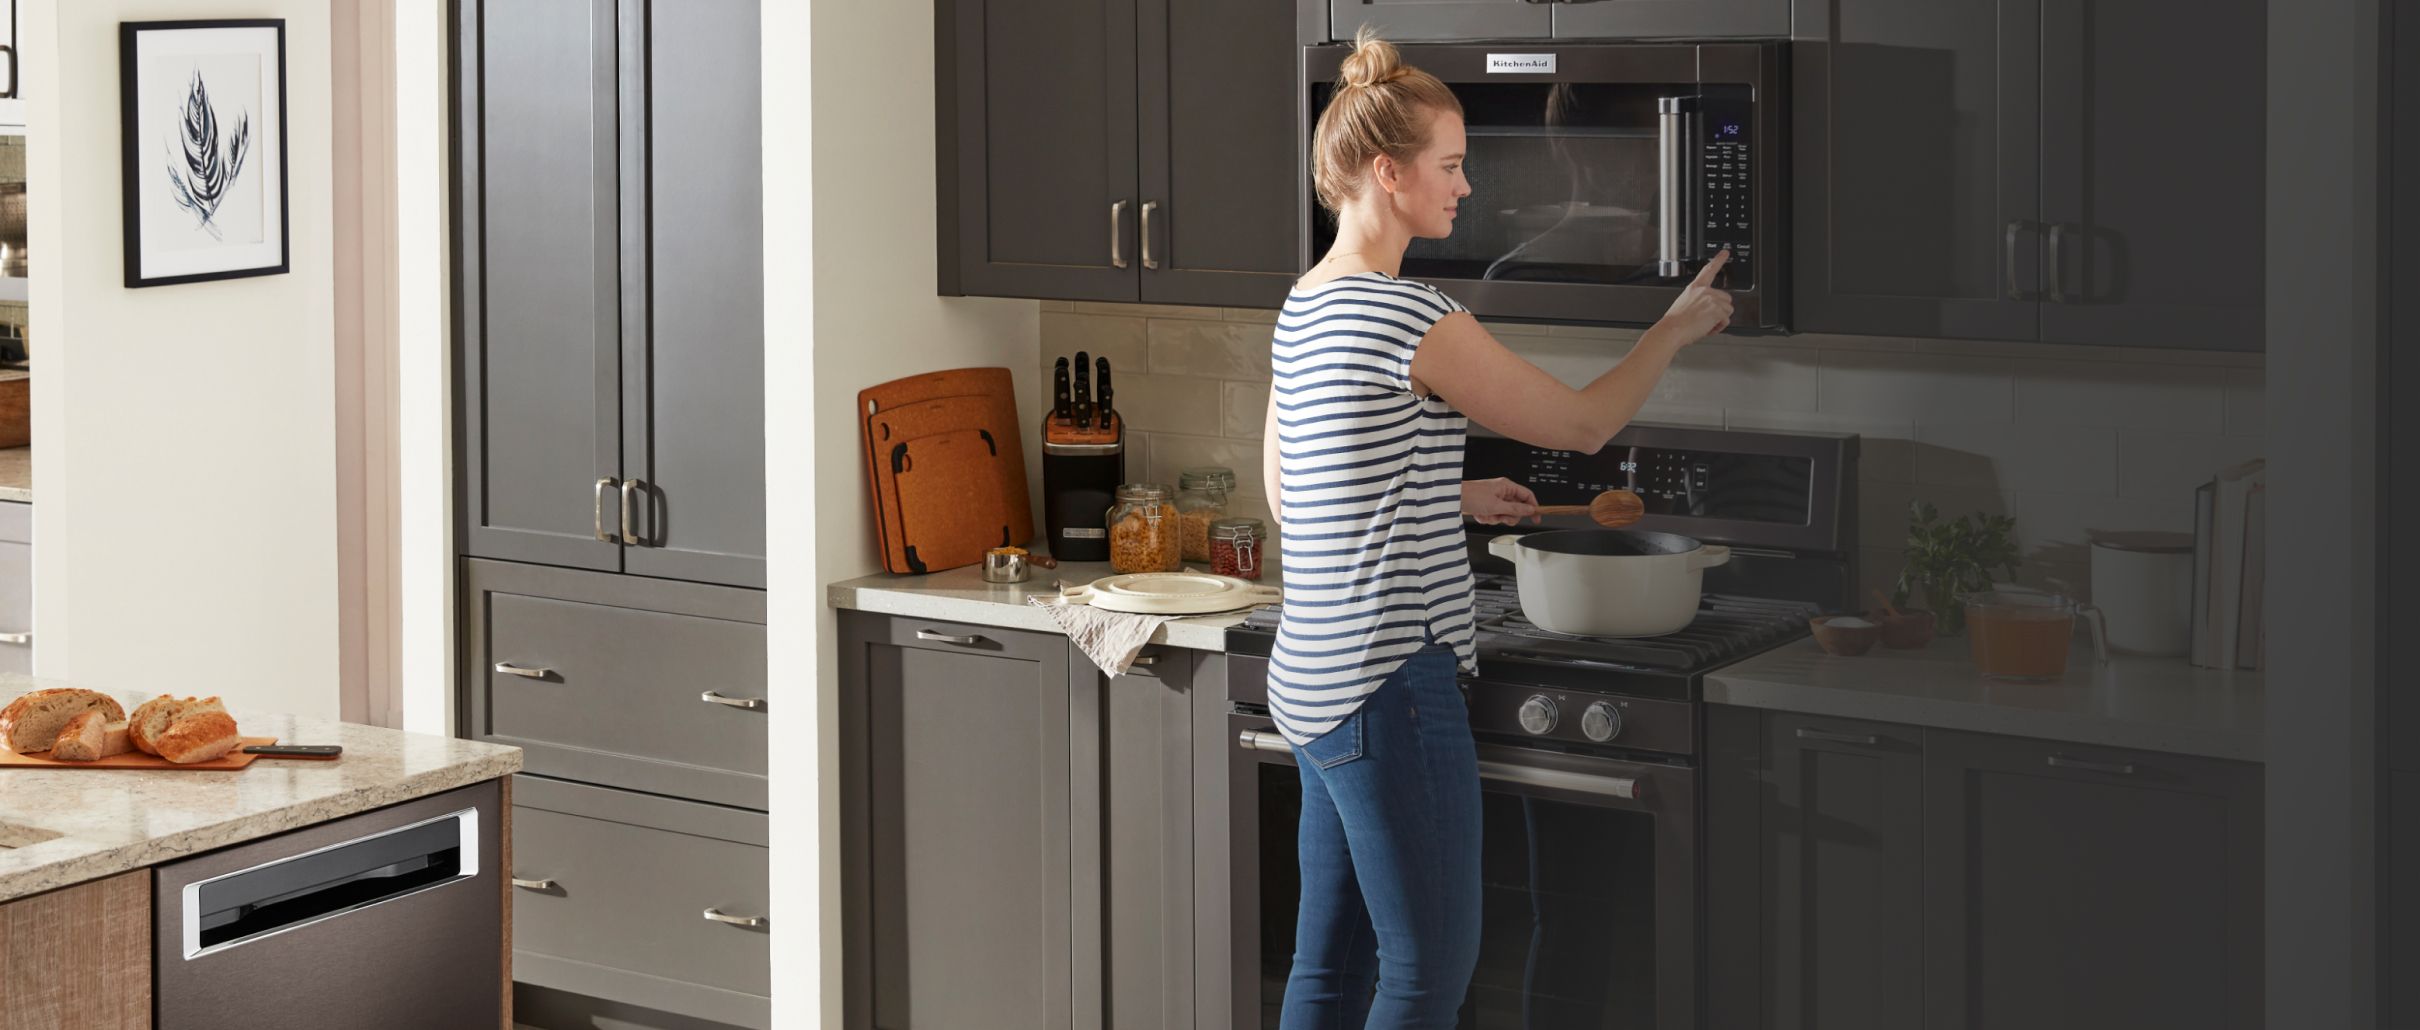 Cooking with a KitchenAid® Range and Microwave.